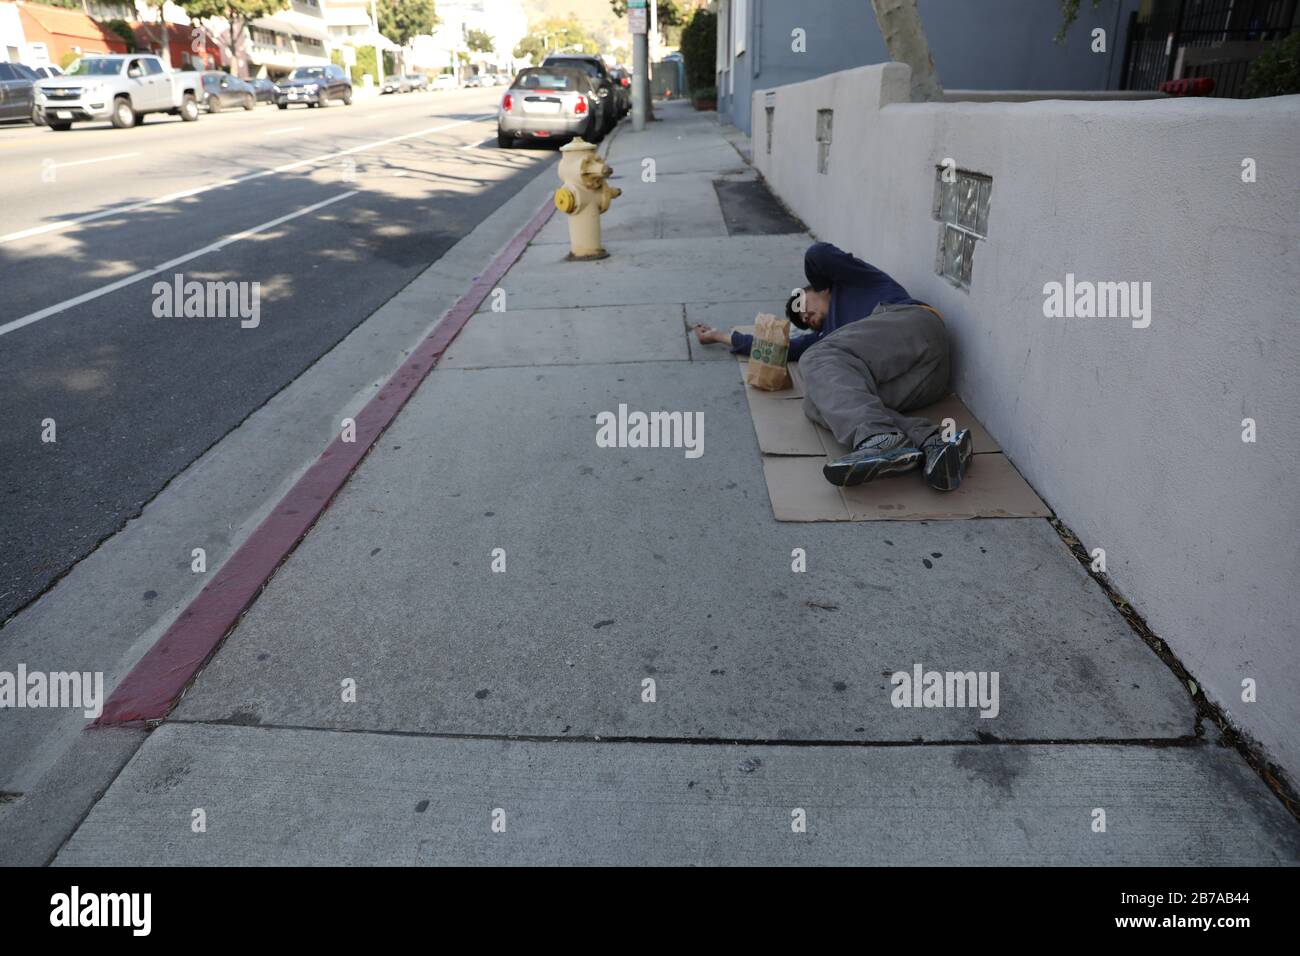 Homeless Man Sleeping On The Streets In Downtown La Stock Photo Alamy